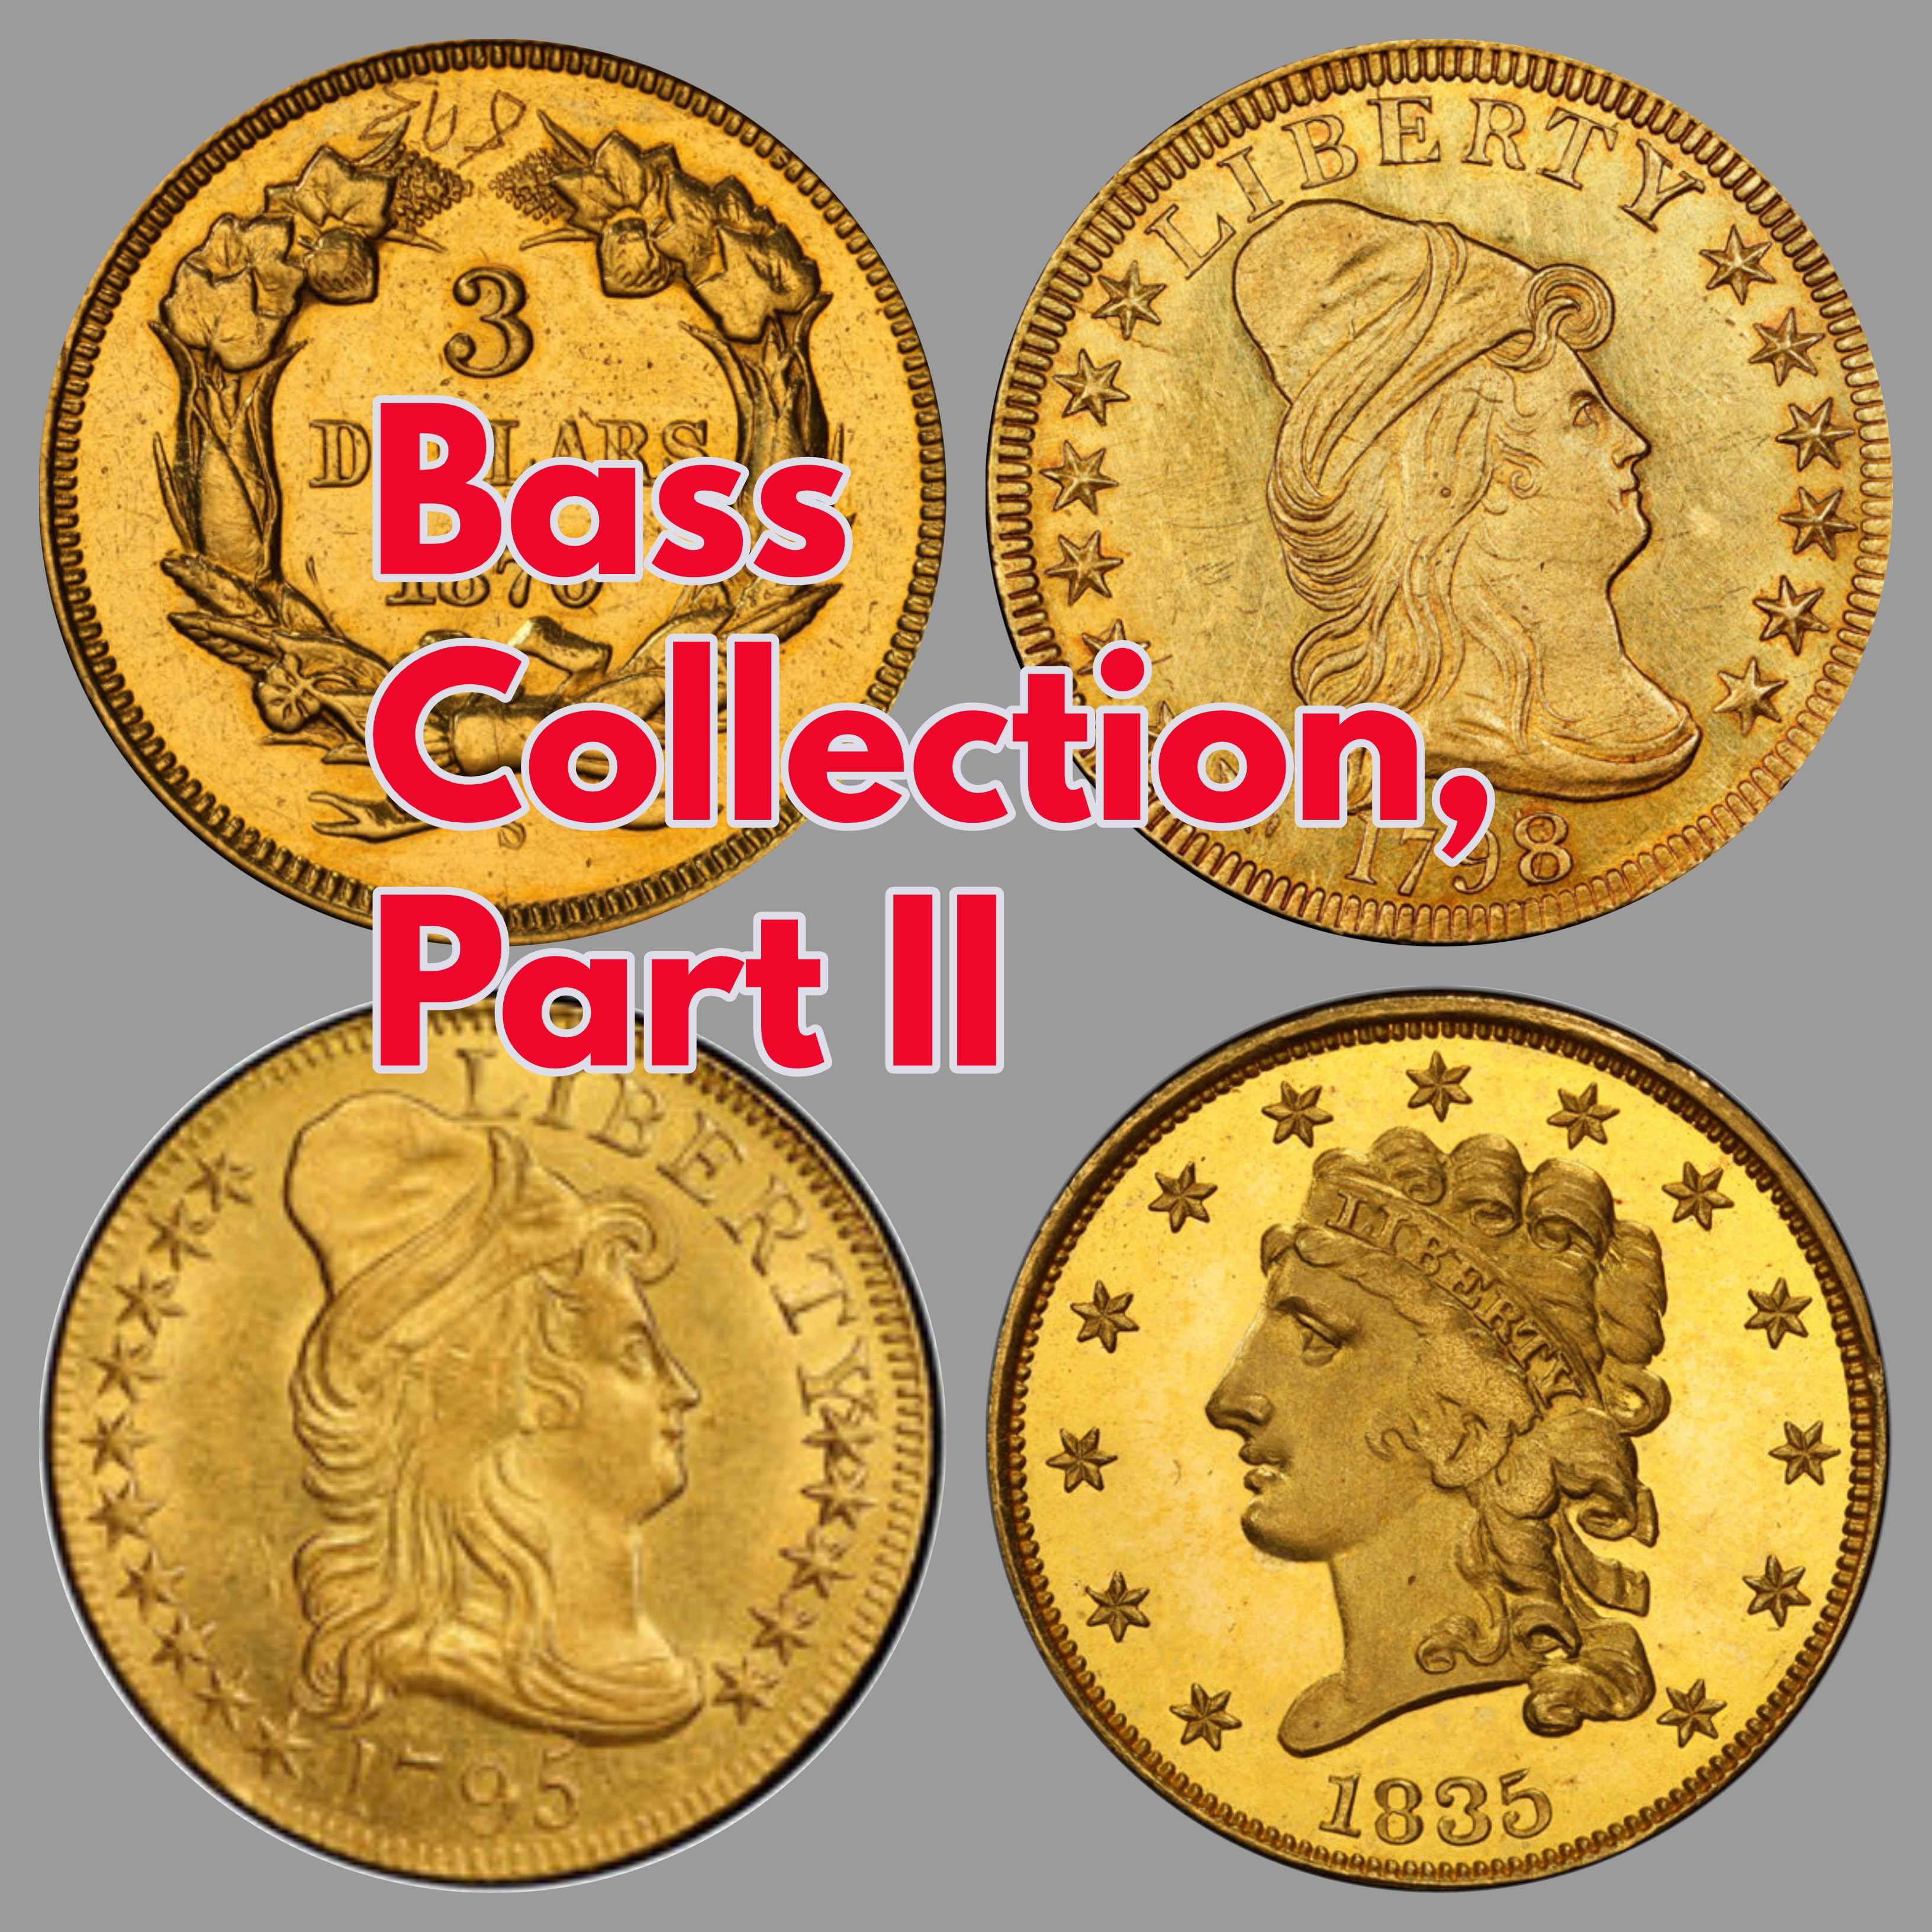 enlarged image for Unique Gold Coin Shines At $5.52 Million, Leads Record-Setting Bass Collection Auction Above $24 Million